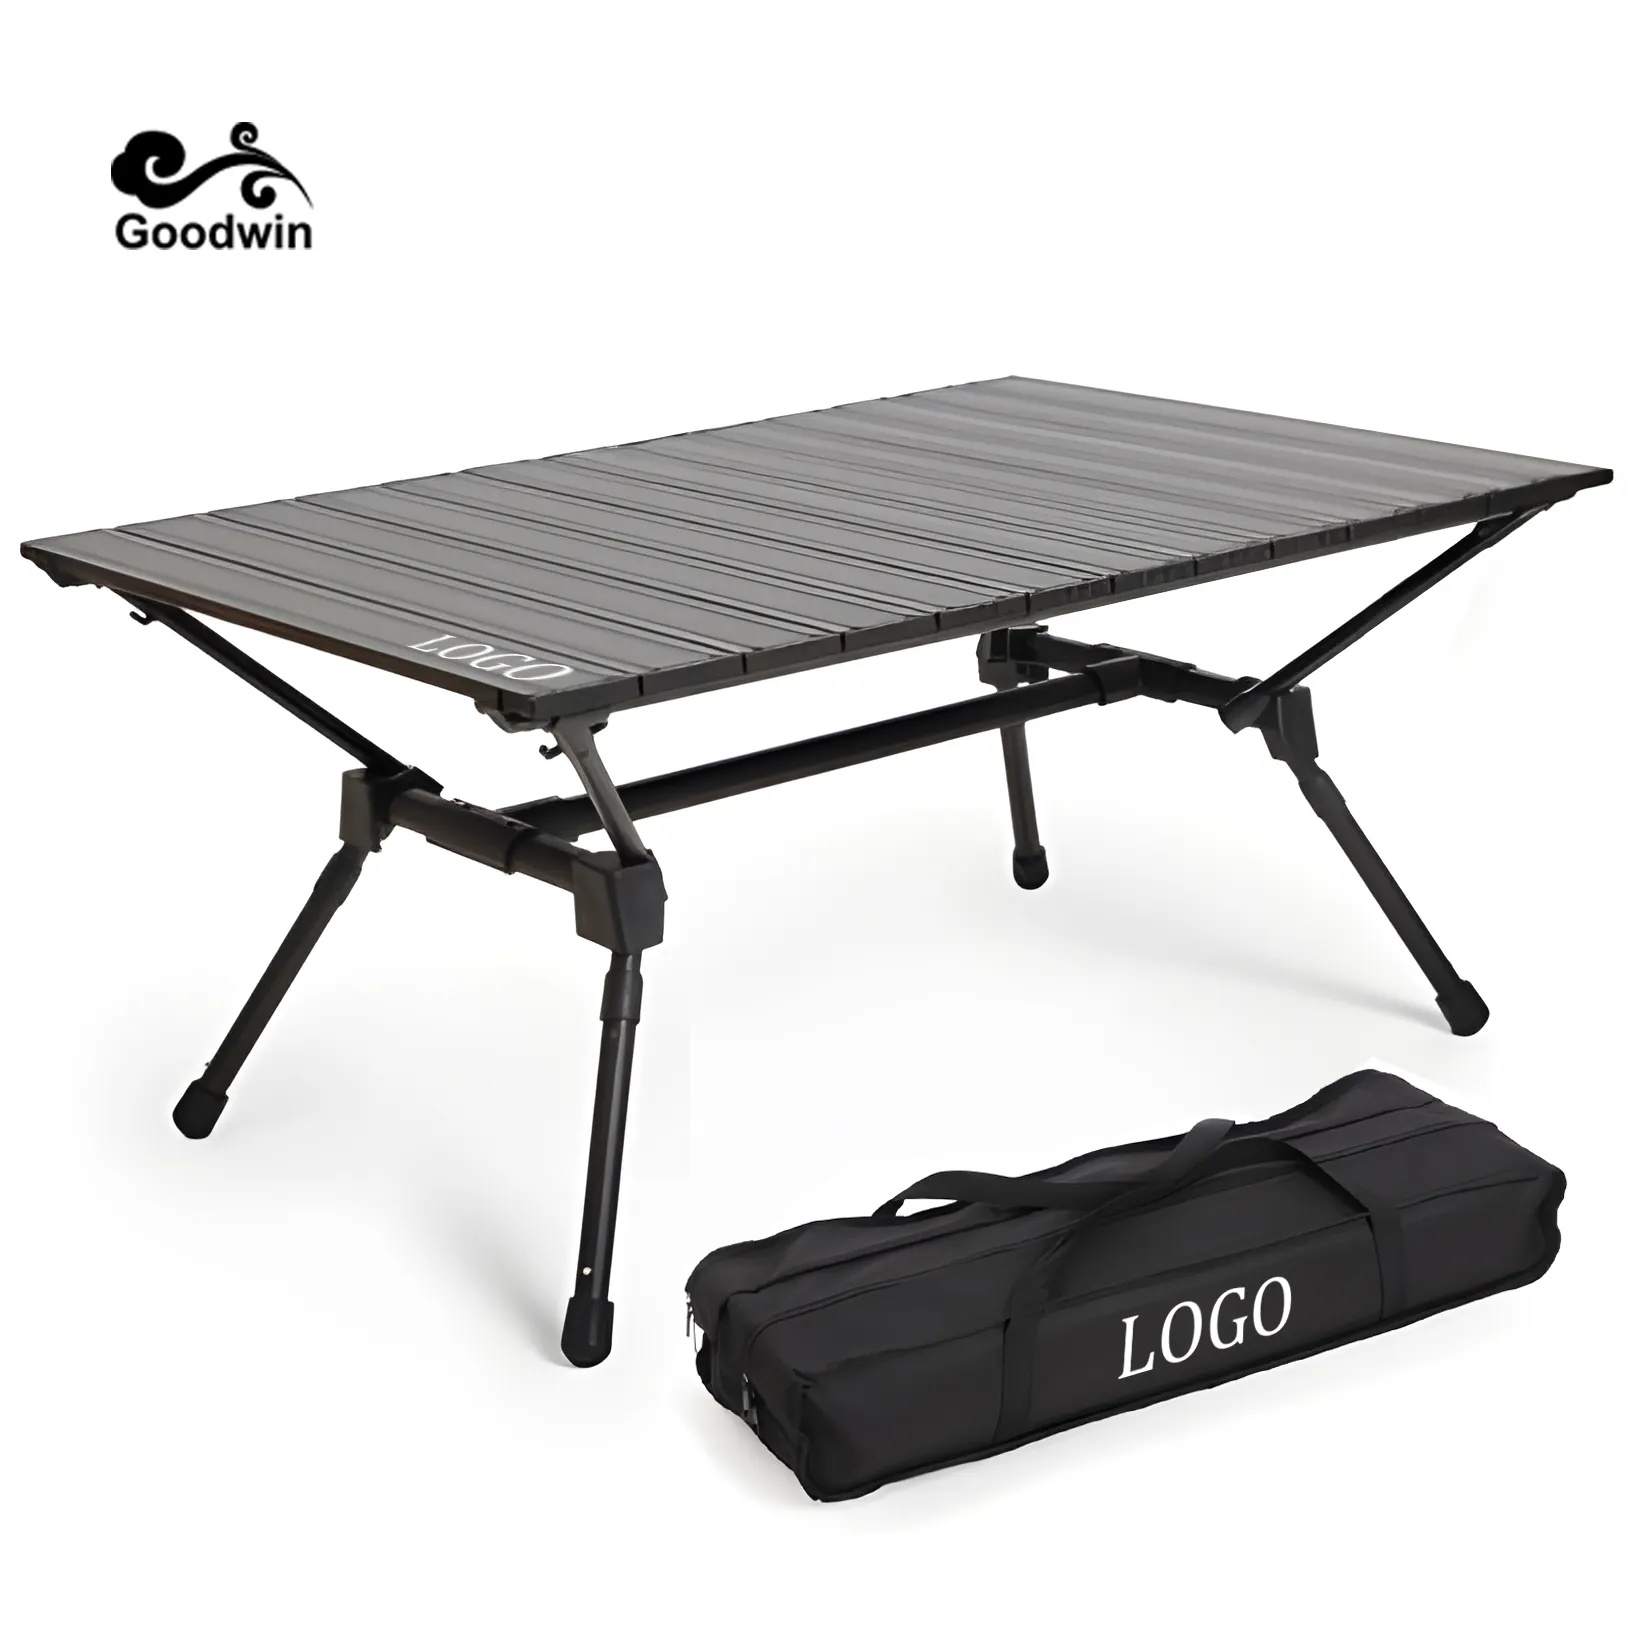 Outdoor Aluminum Egg Roll Table Top Height Adjustable Folding Camping Portable Table with Storage Bag